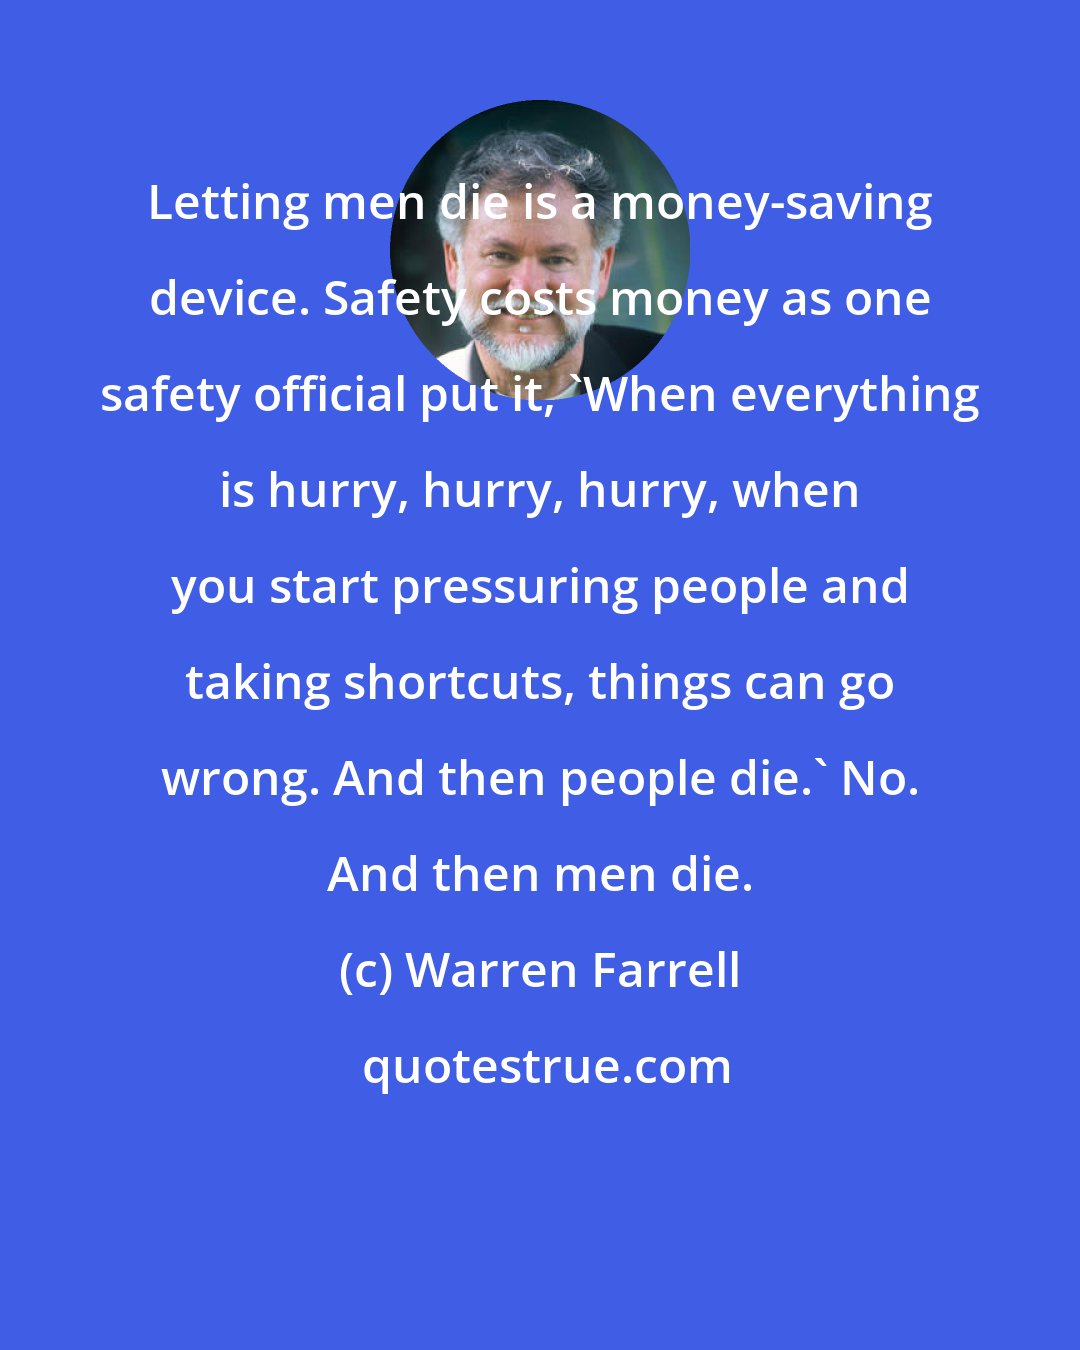 Warren Farrell: Letting men die is a money-saving device. Safety costs money as one safety official put it, 'When everything is hurry, hurry, hurry, when you start pressuring people and taking shortcuts, things can go wrong. And then people die.' No. And then men die.